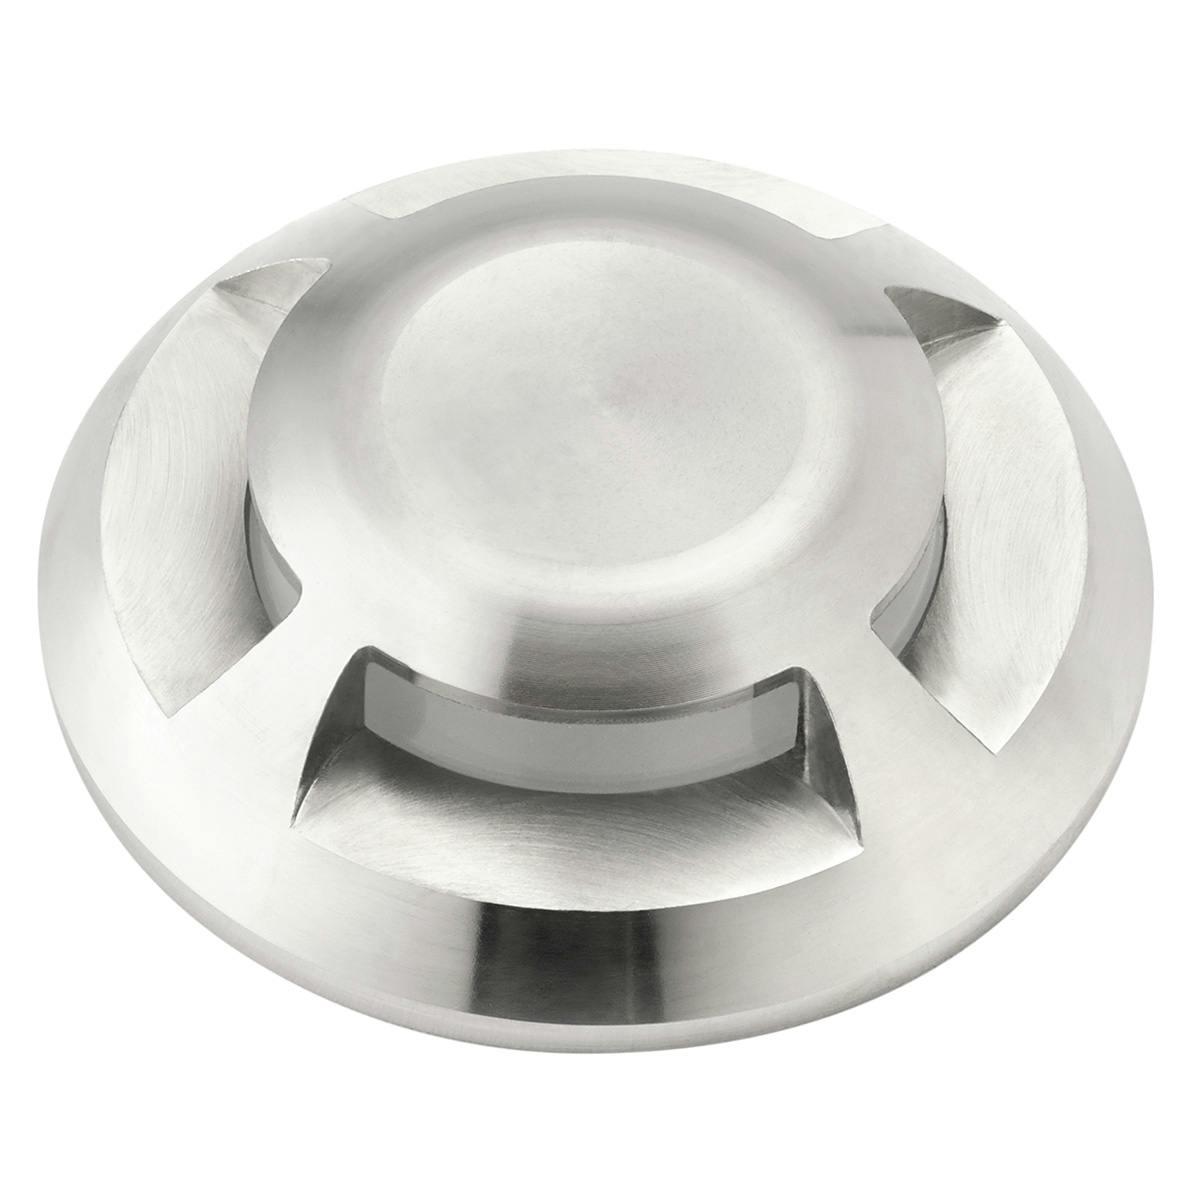 Mini 4 Way Top Accessory Stainless Steel on a white background